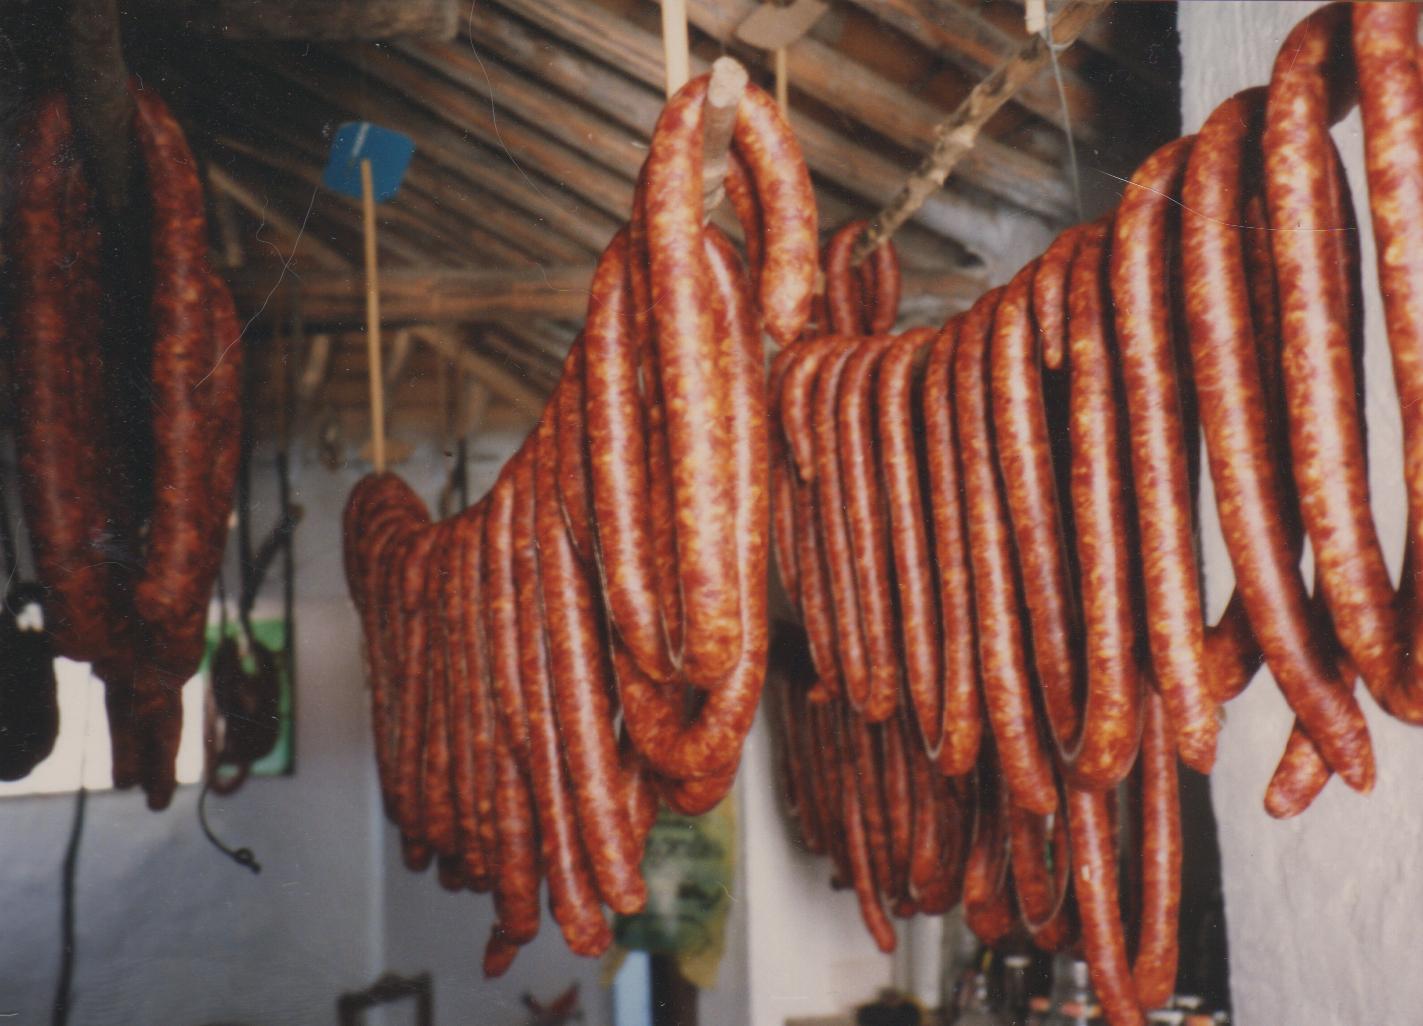 Sausages hanging from strings.